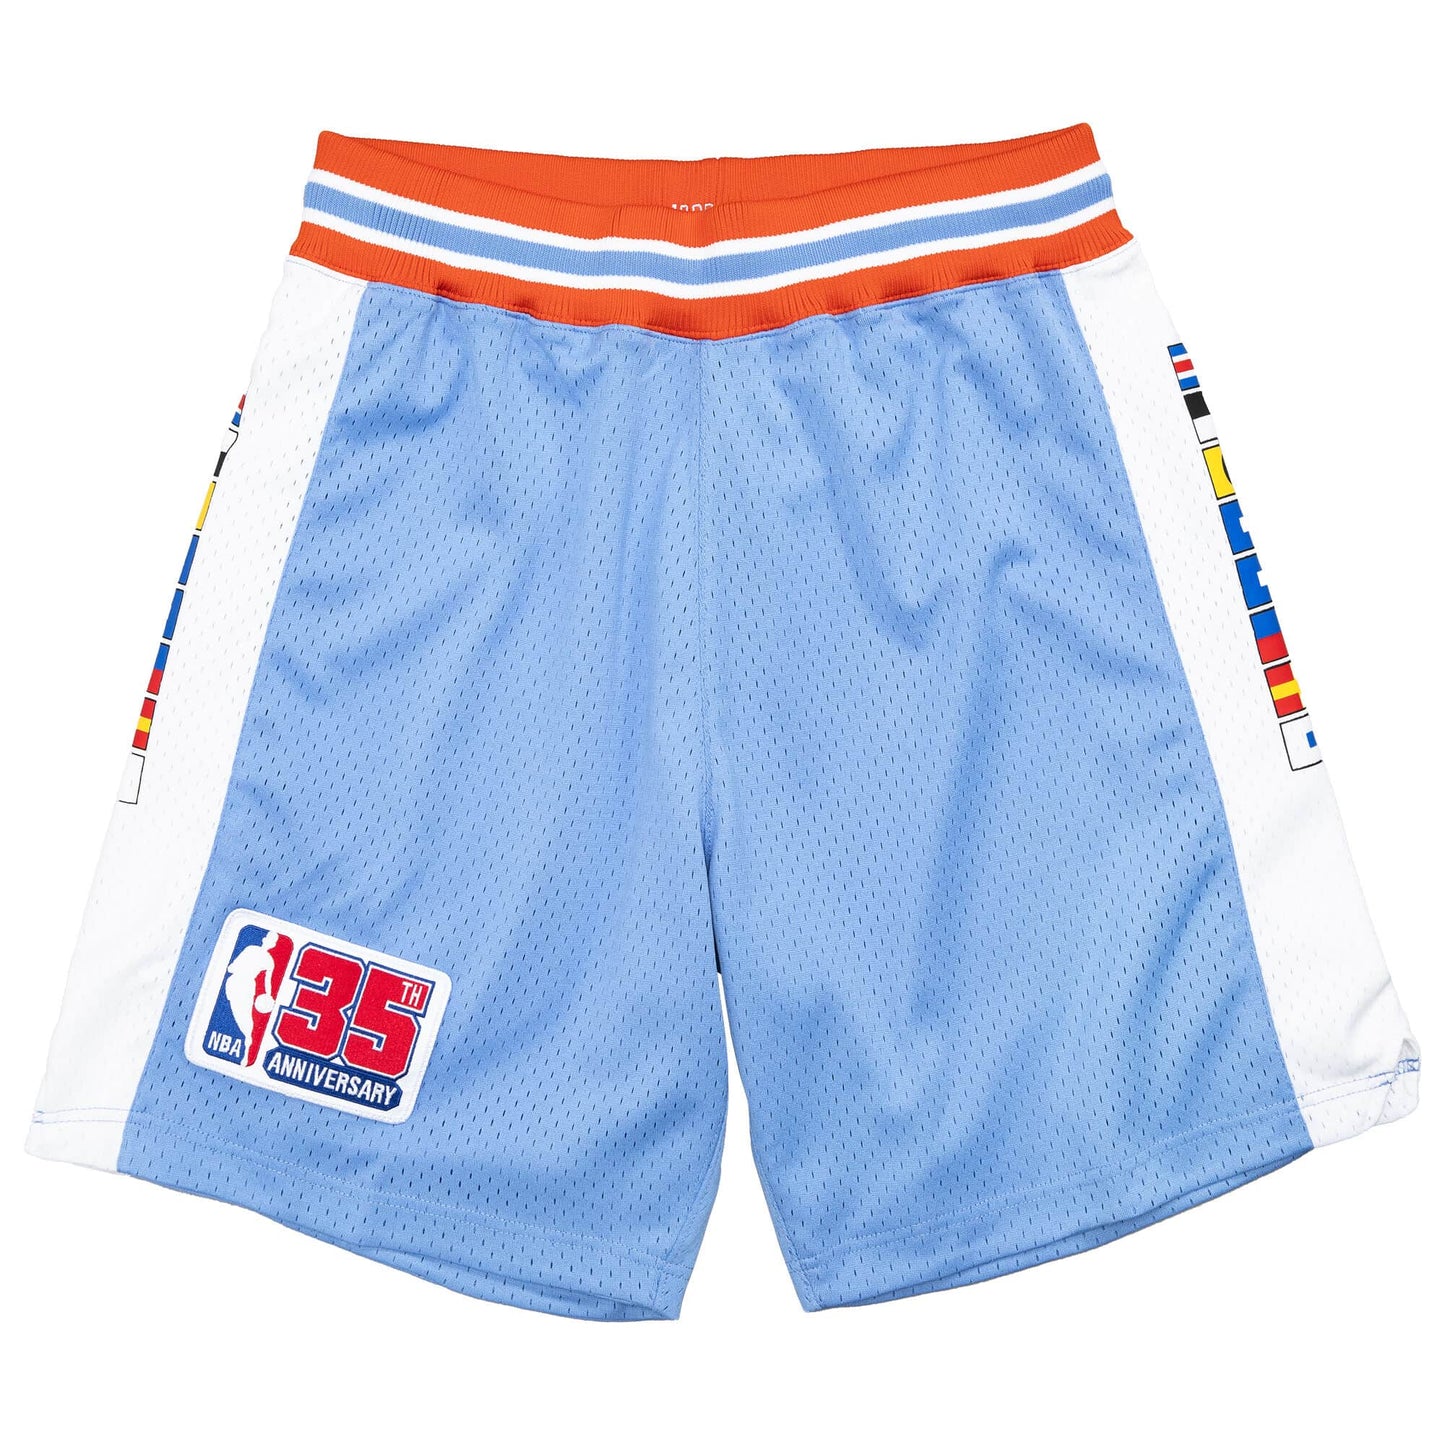 NBA Authentic Shorts San Diego Clippers 1980-81